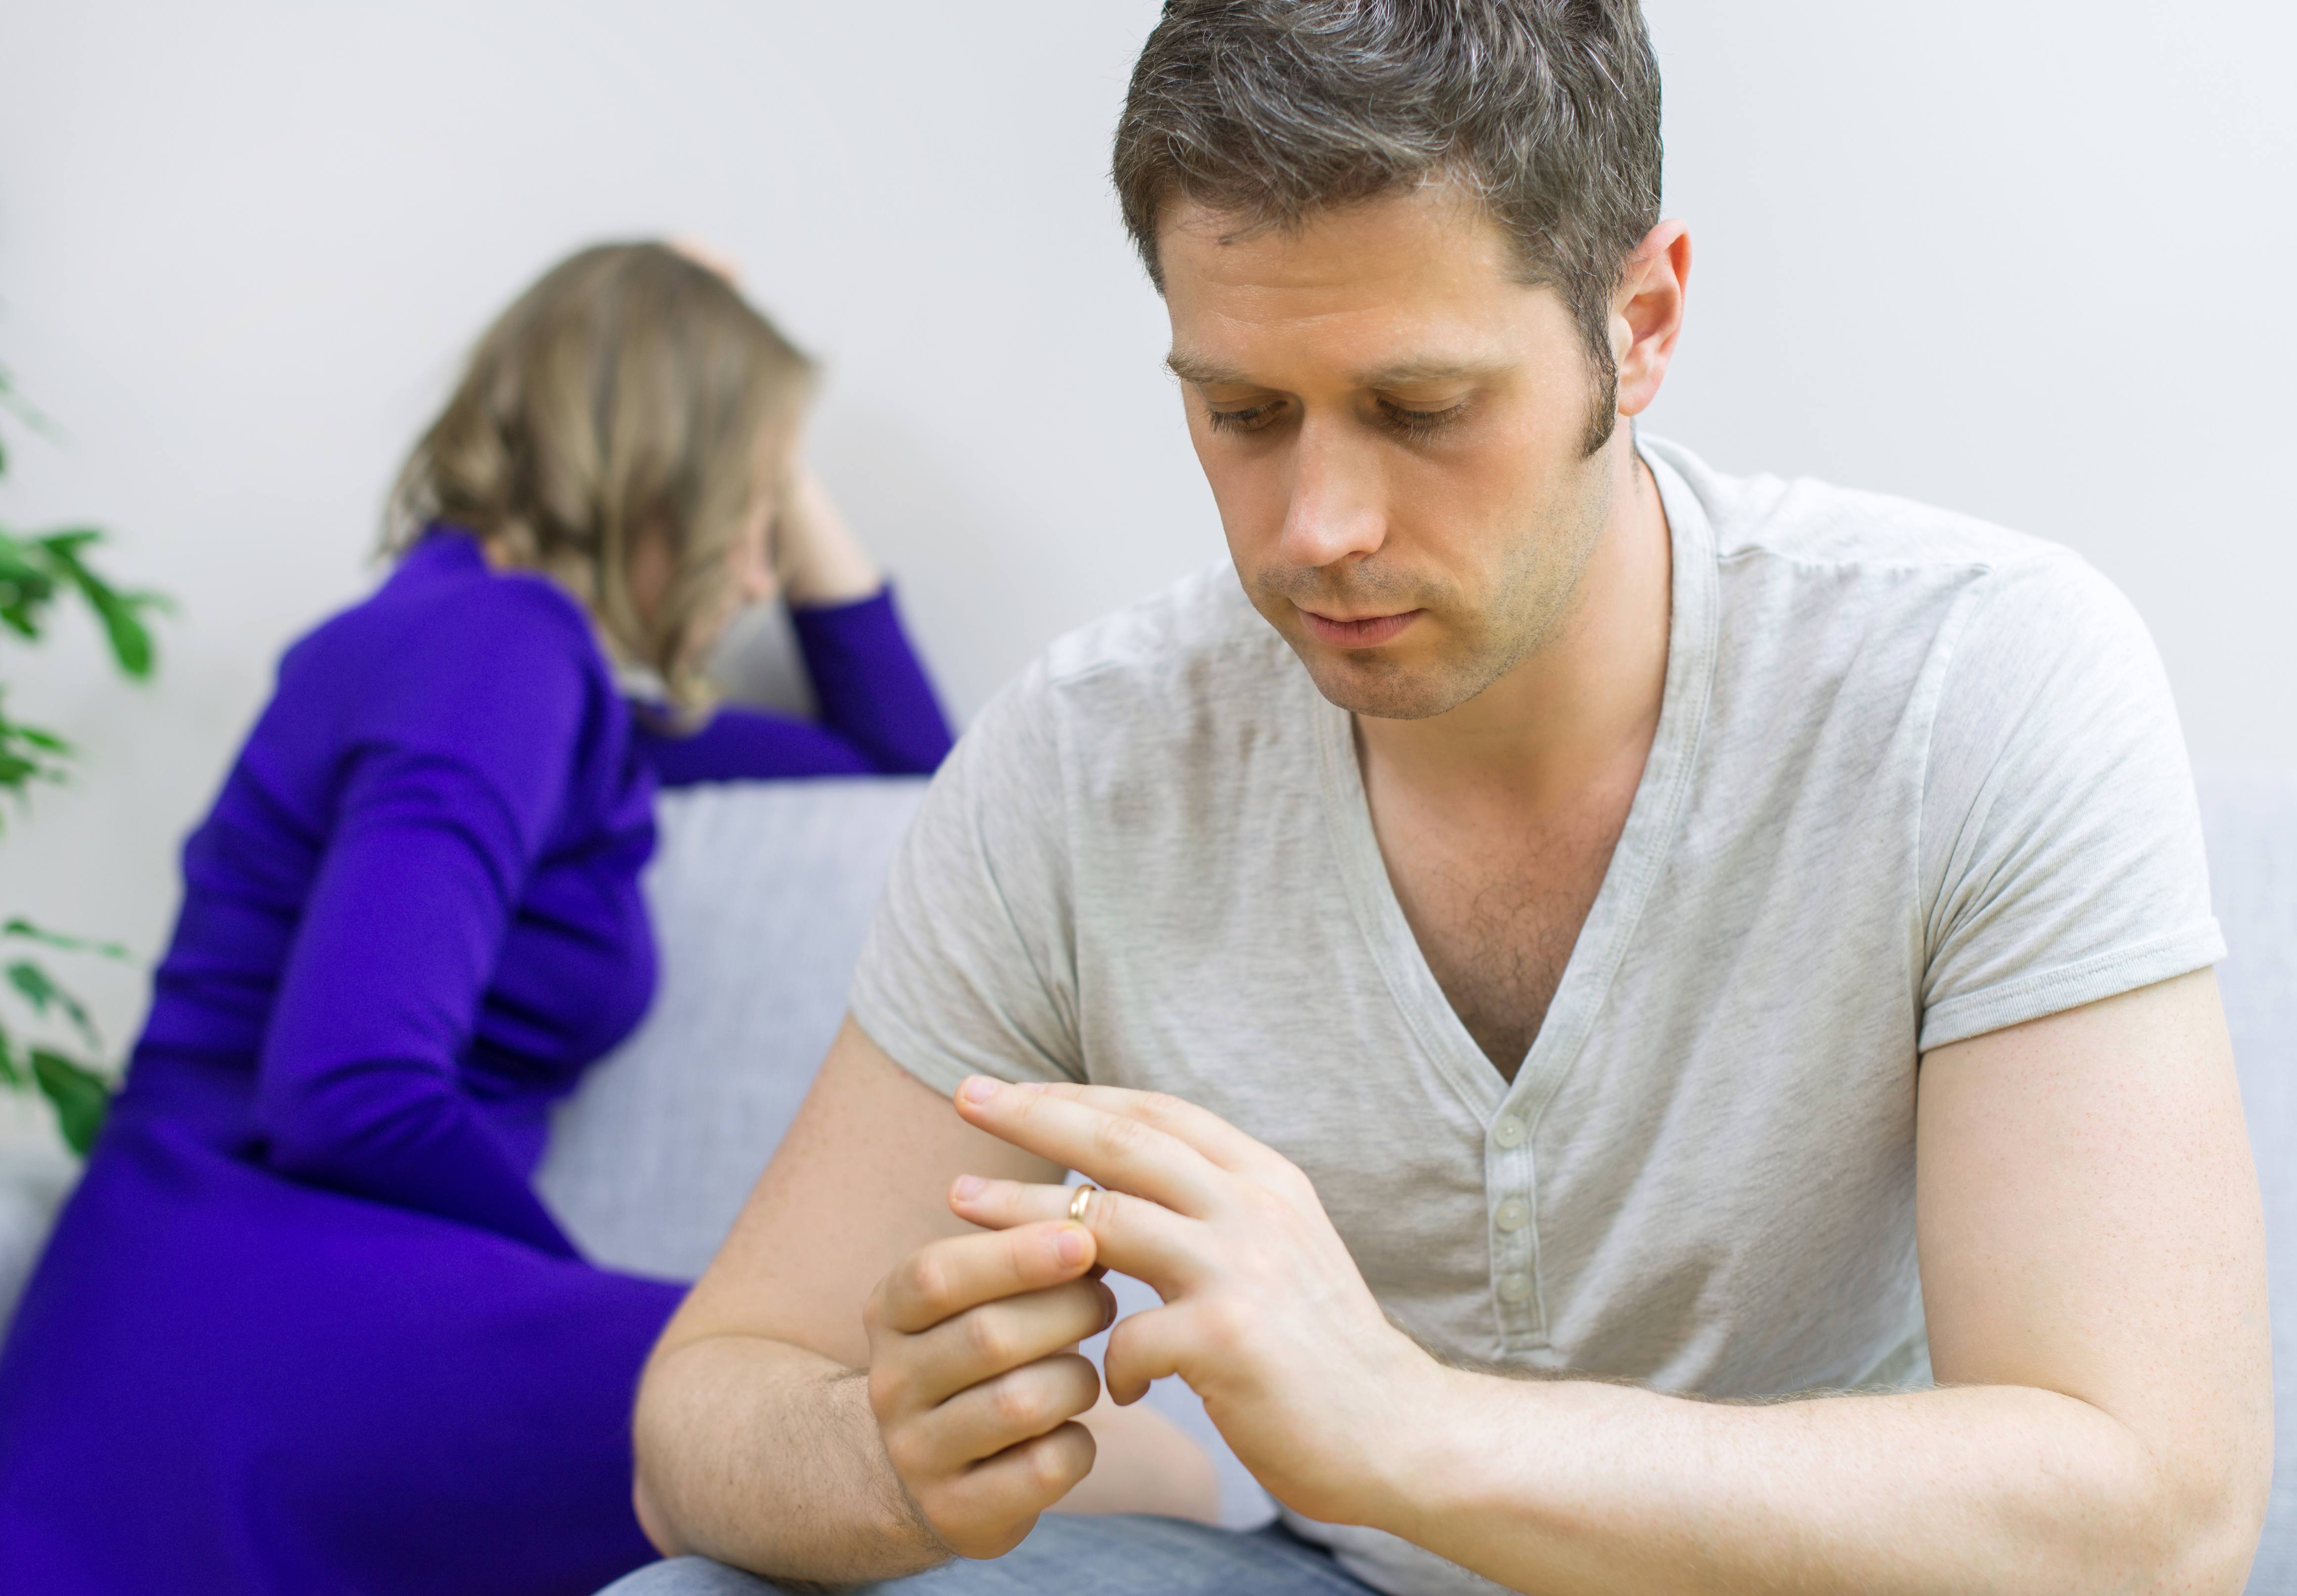 Men And Divorce: Mistakes To Avoid